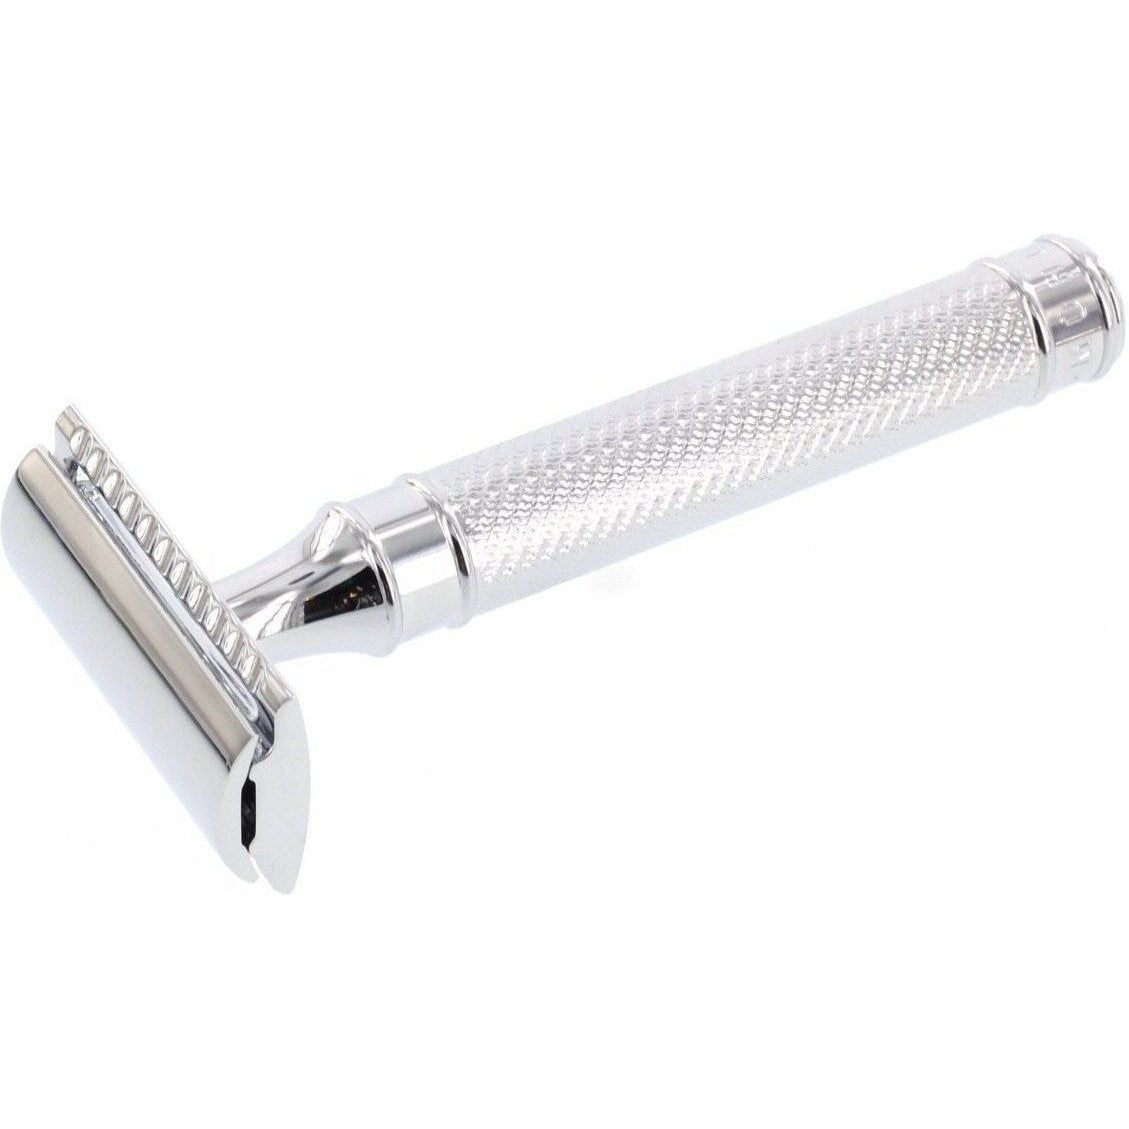 A Mühle R89 Closed Comb Safety Razor by KirbyAllison.com on a white background.